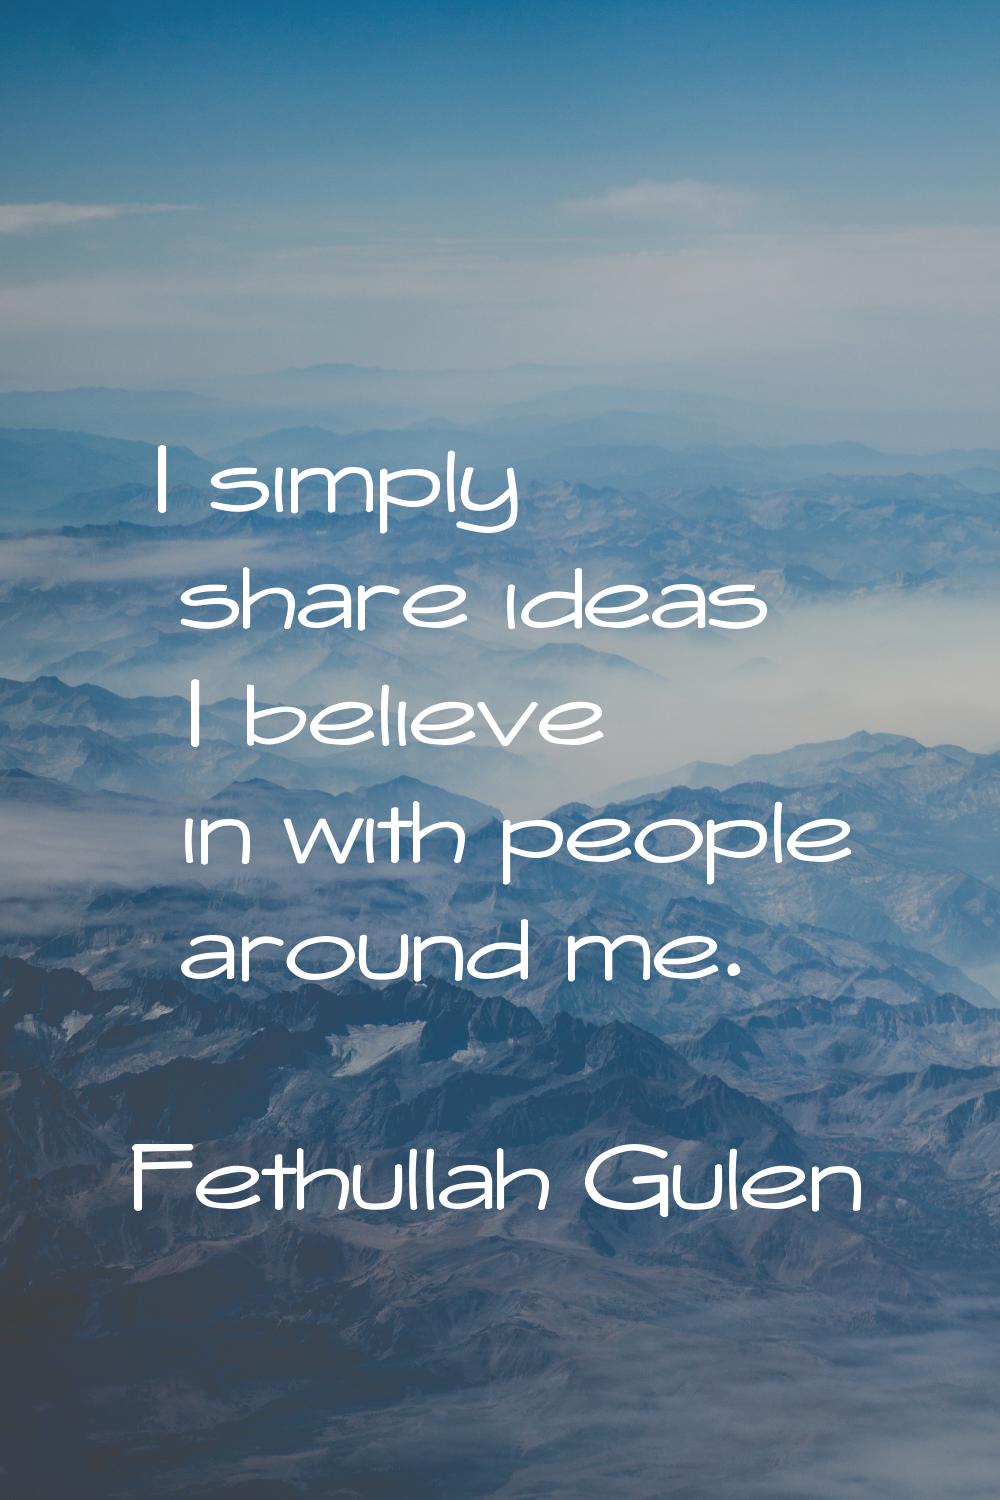 I simply share ideas I believe in with people around me.